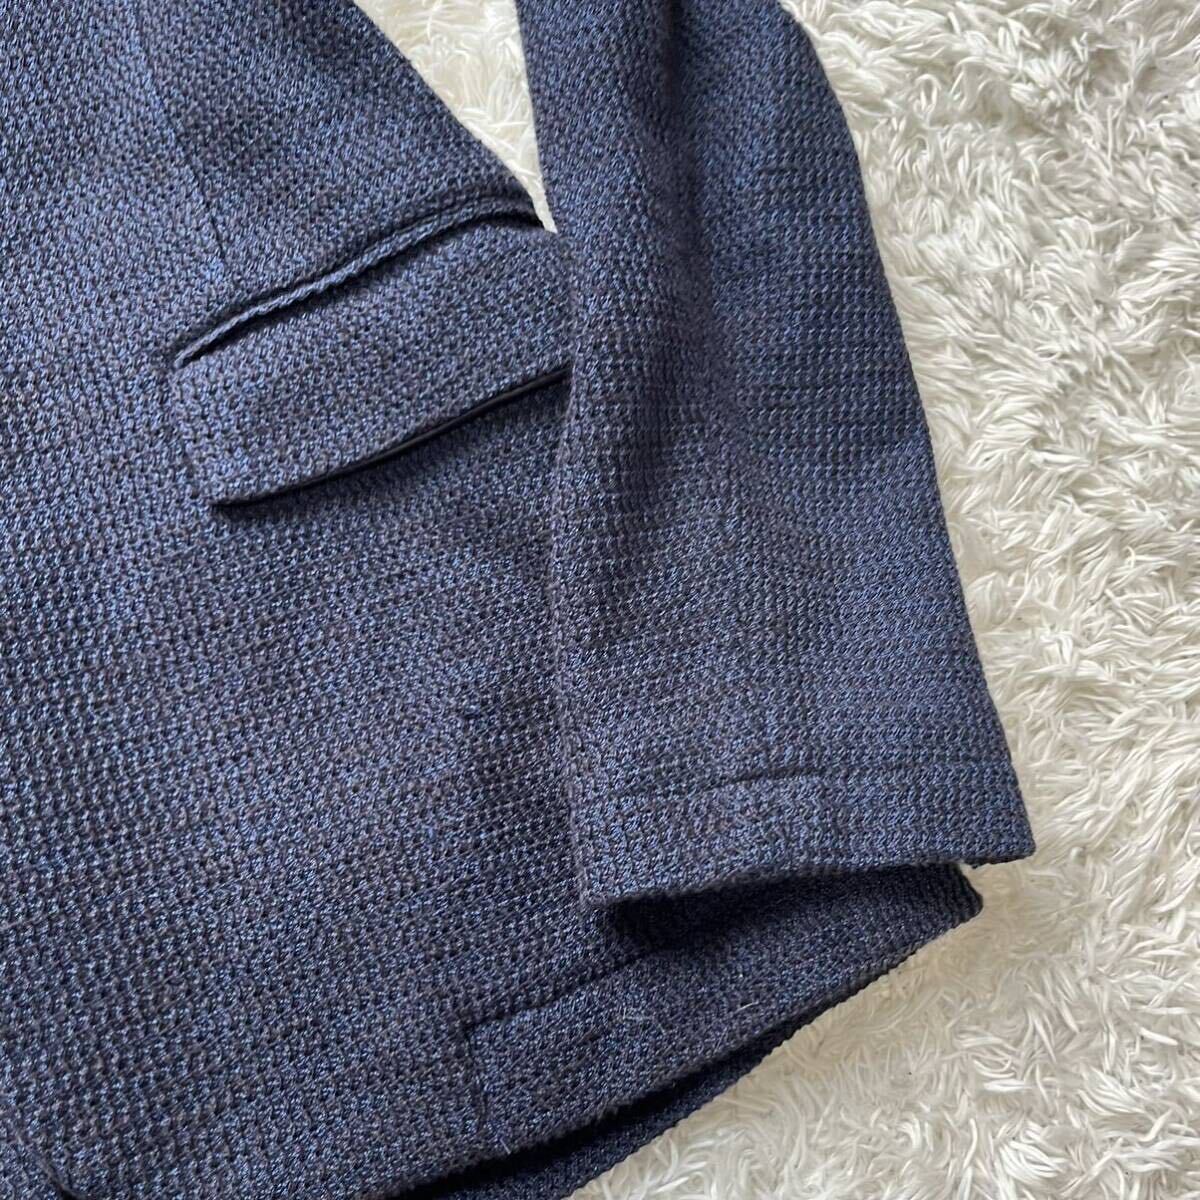  ultimate beautiful goods rare M~L corresponding United Arrows UNITED ARROWS tailored jacket knitted stretch navy navy blue 2B largish gradation 